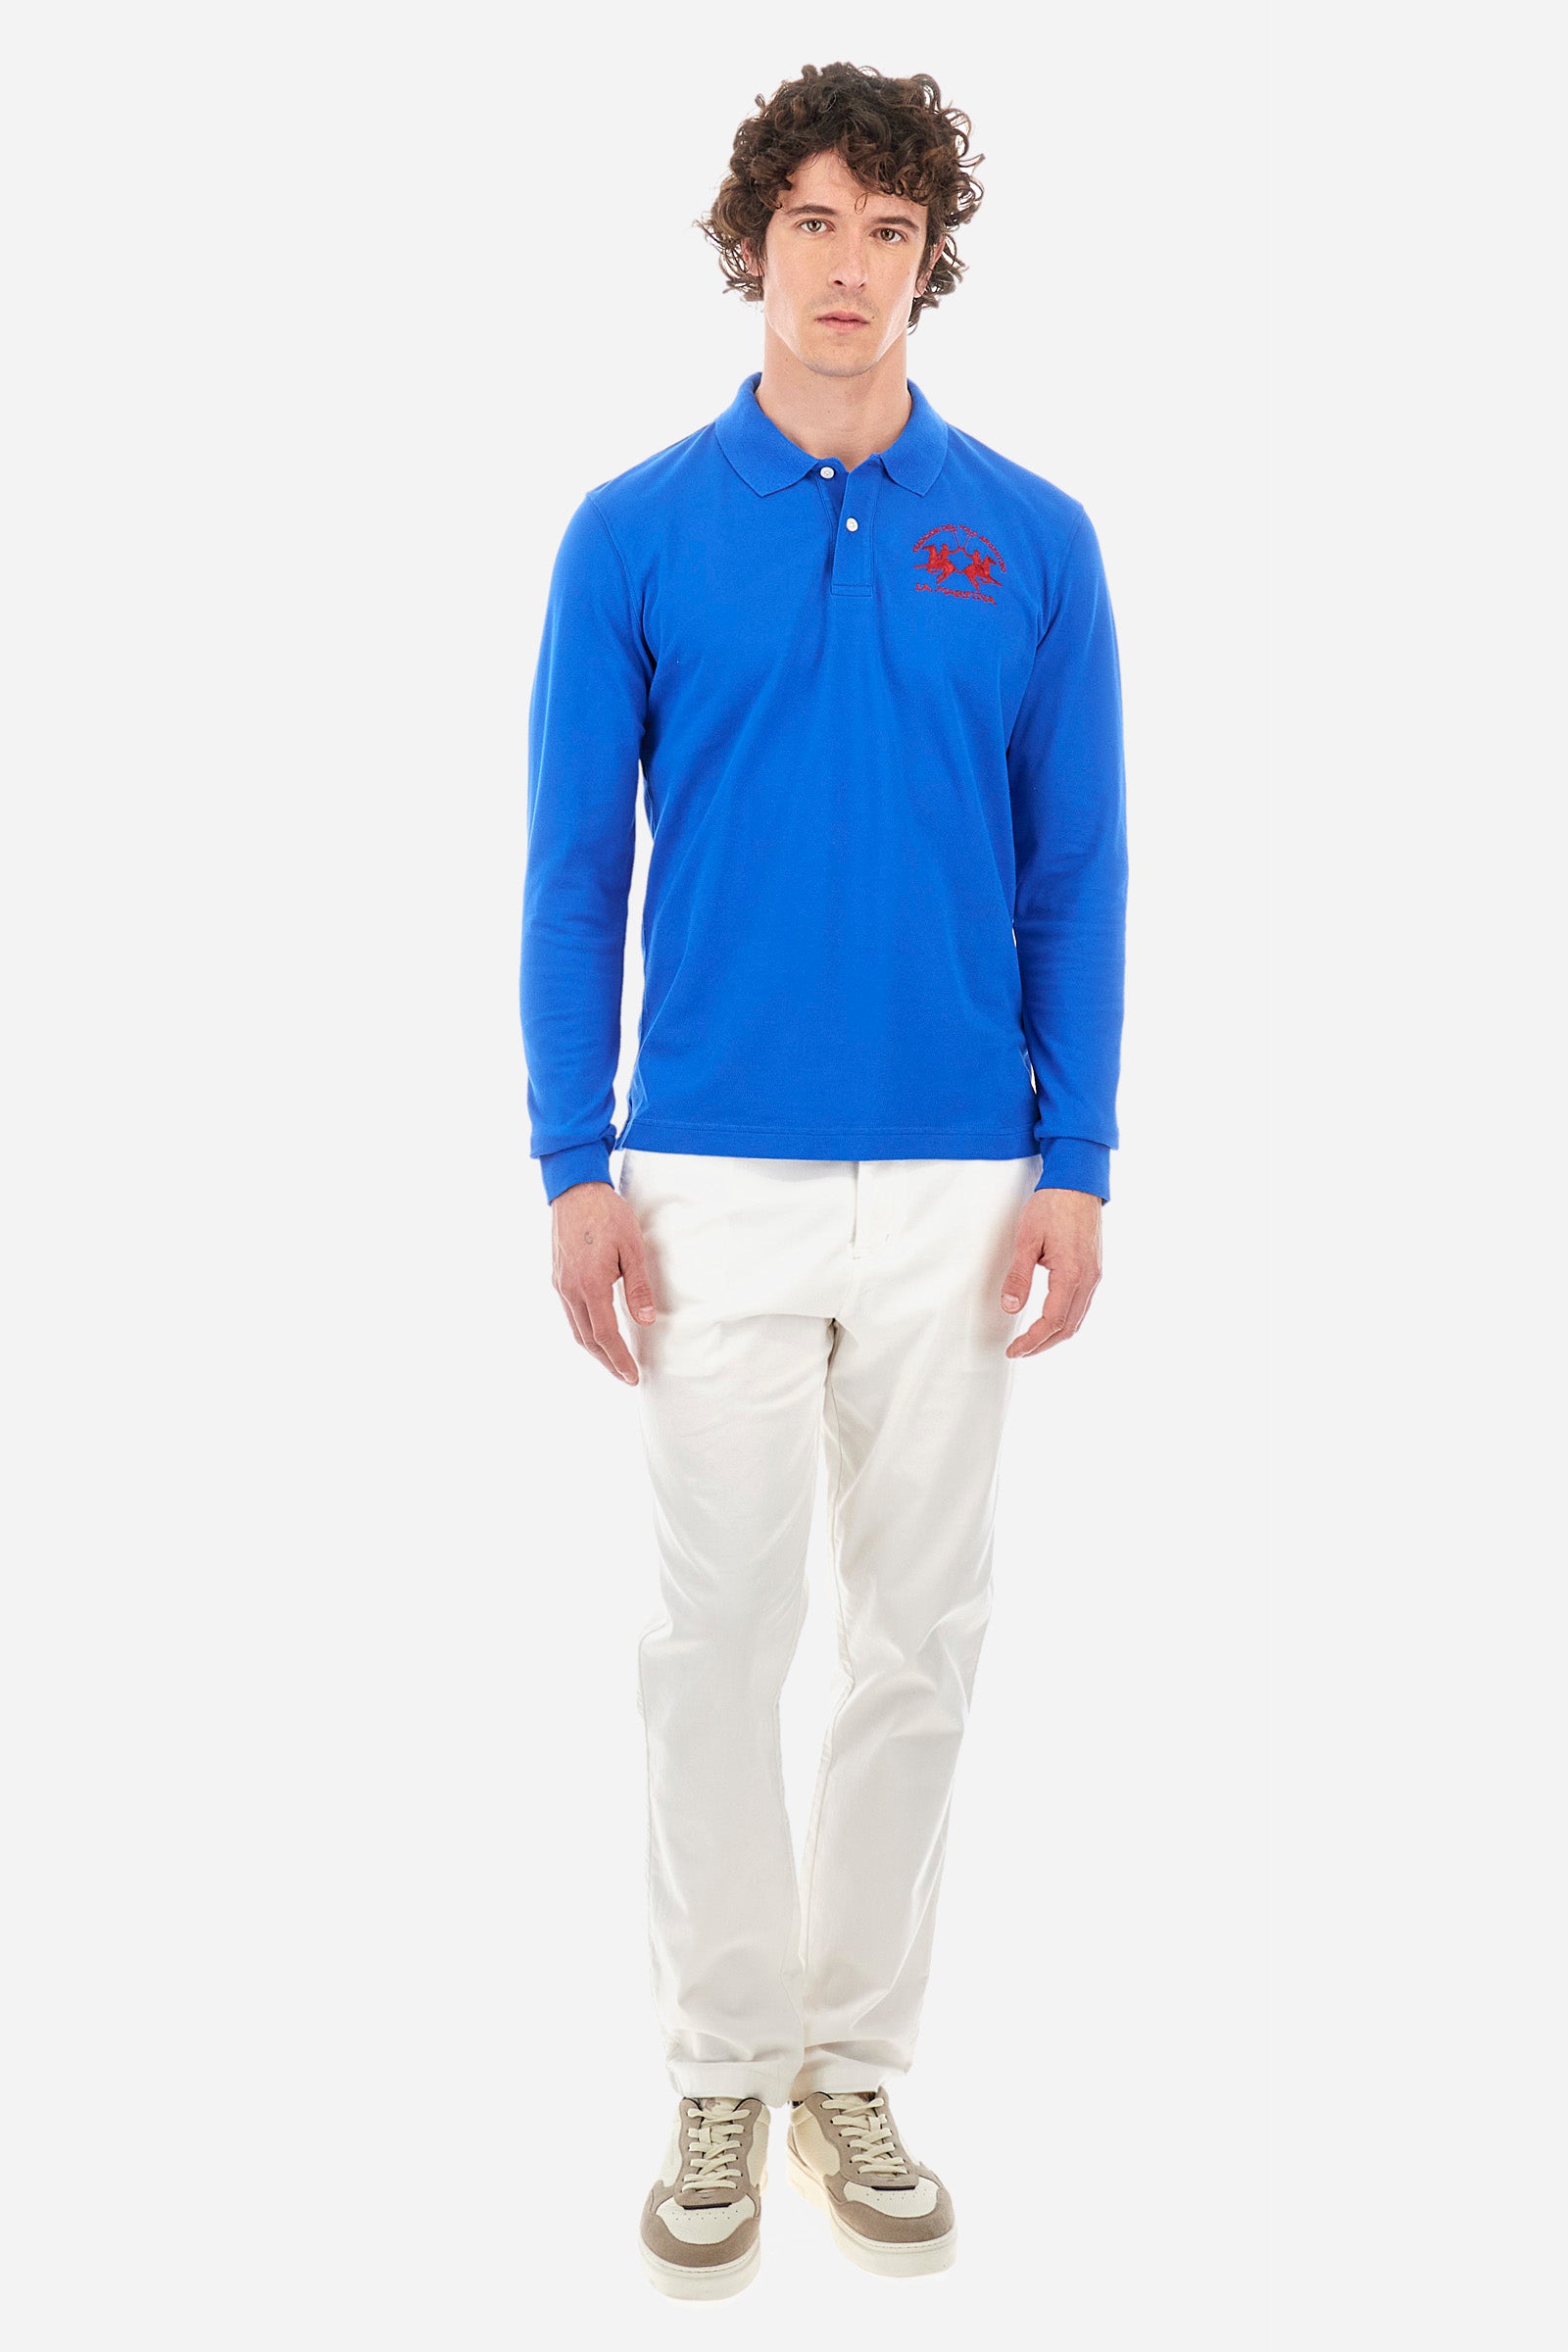 Men's polo shirt in a regular fit - Milo